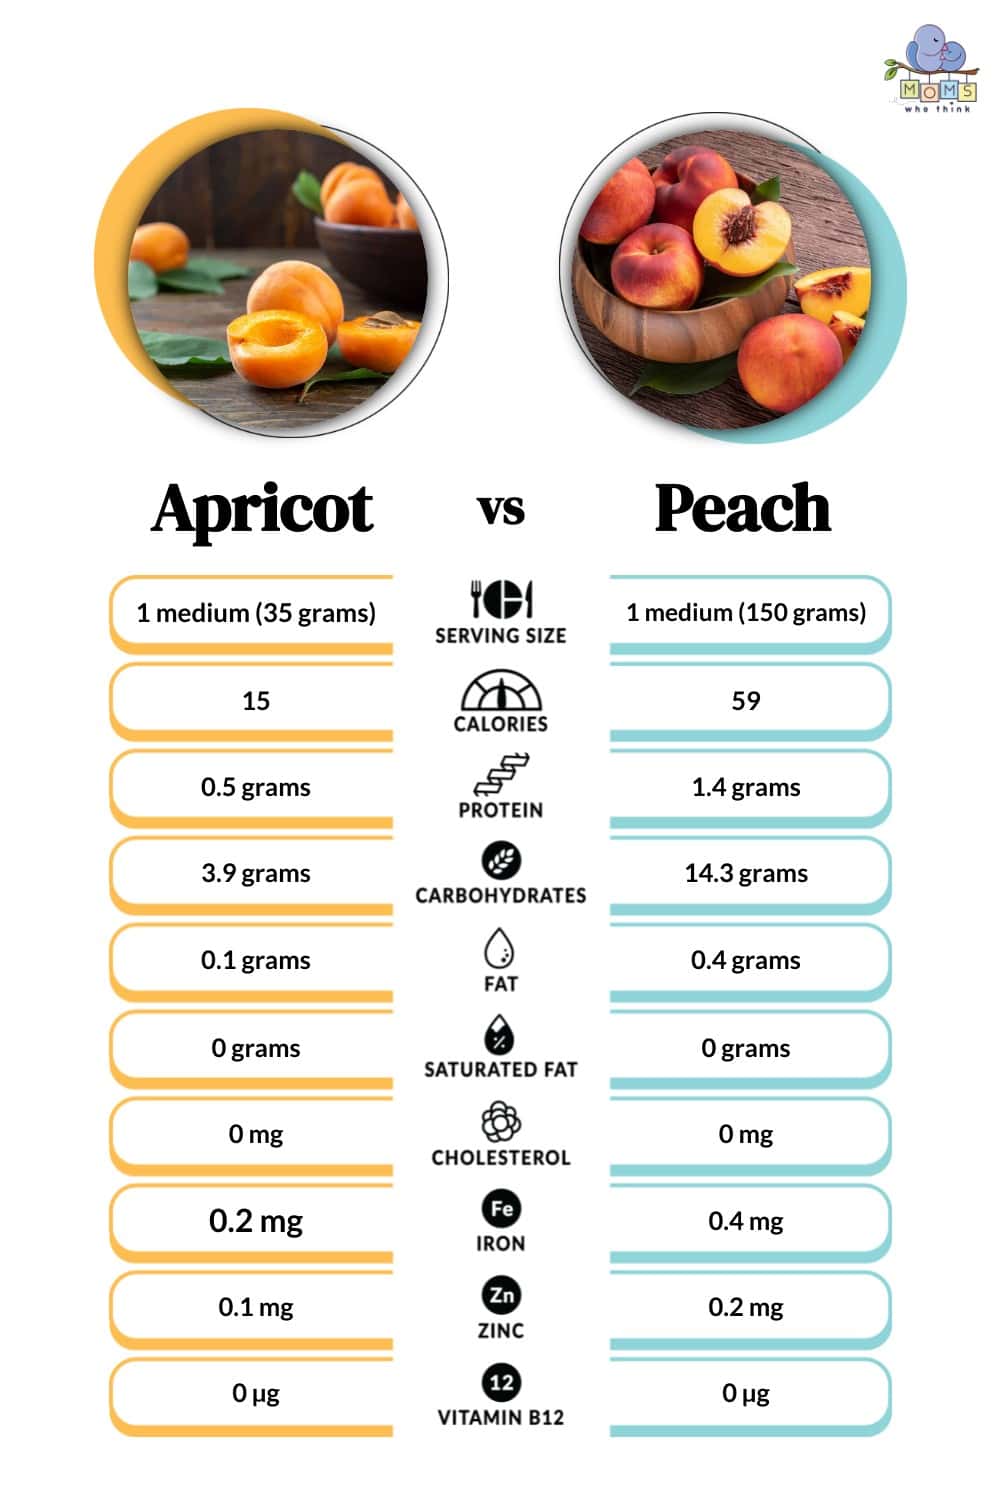 Apricot vs Peach Nutritional Facts